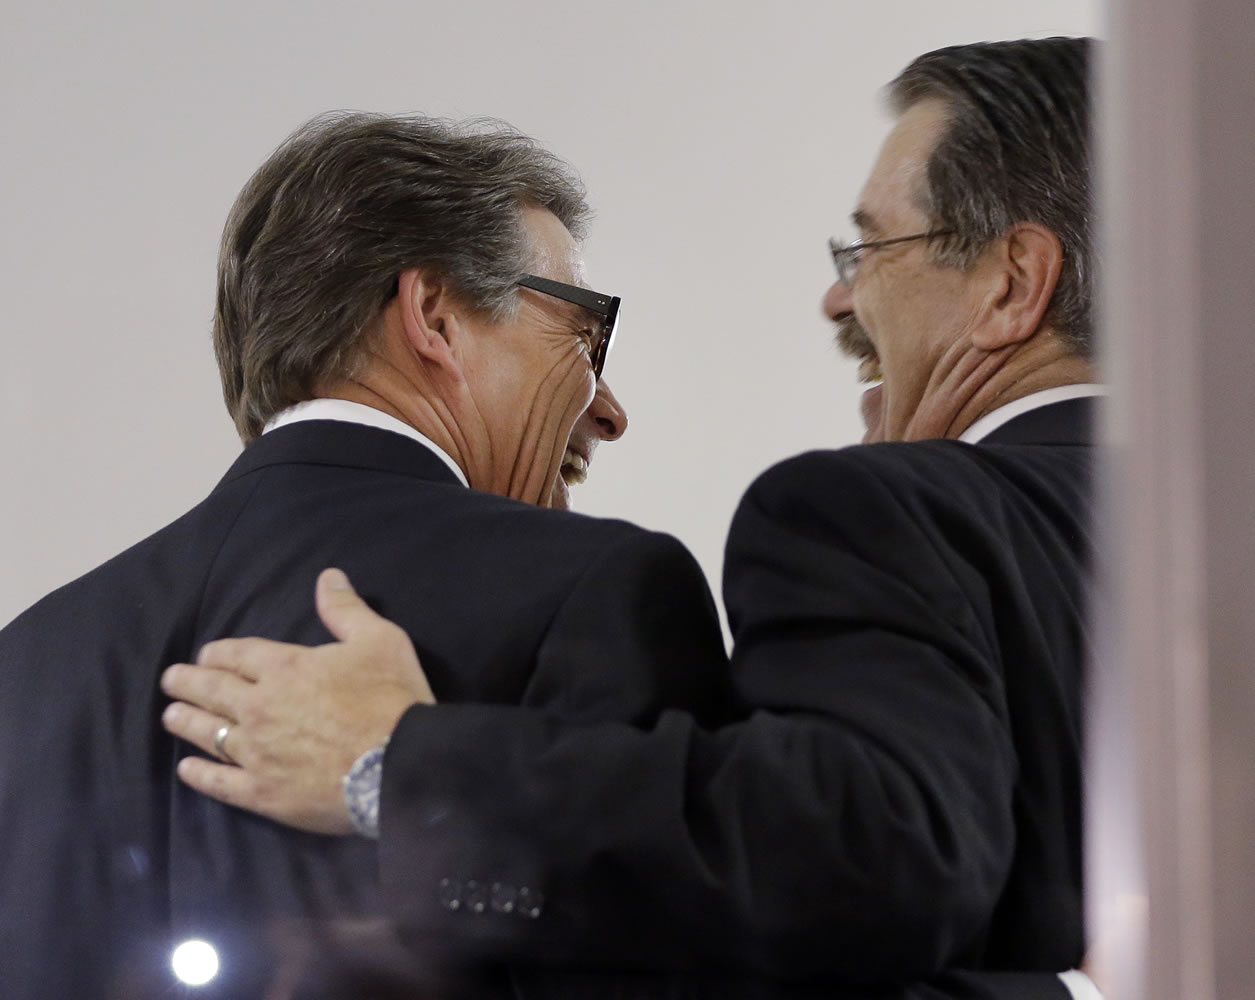 ERIC GAY/Associated Press
Texas Gov. Rick Perry, left, laughs with his attorney, David Botsford, as he is booked Tuesday at the Blackwell Thurman Criminal Justice Center in Austin, Texas, on two felony counts.